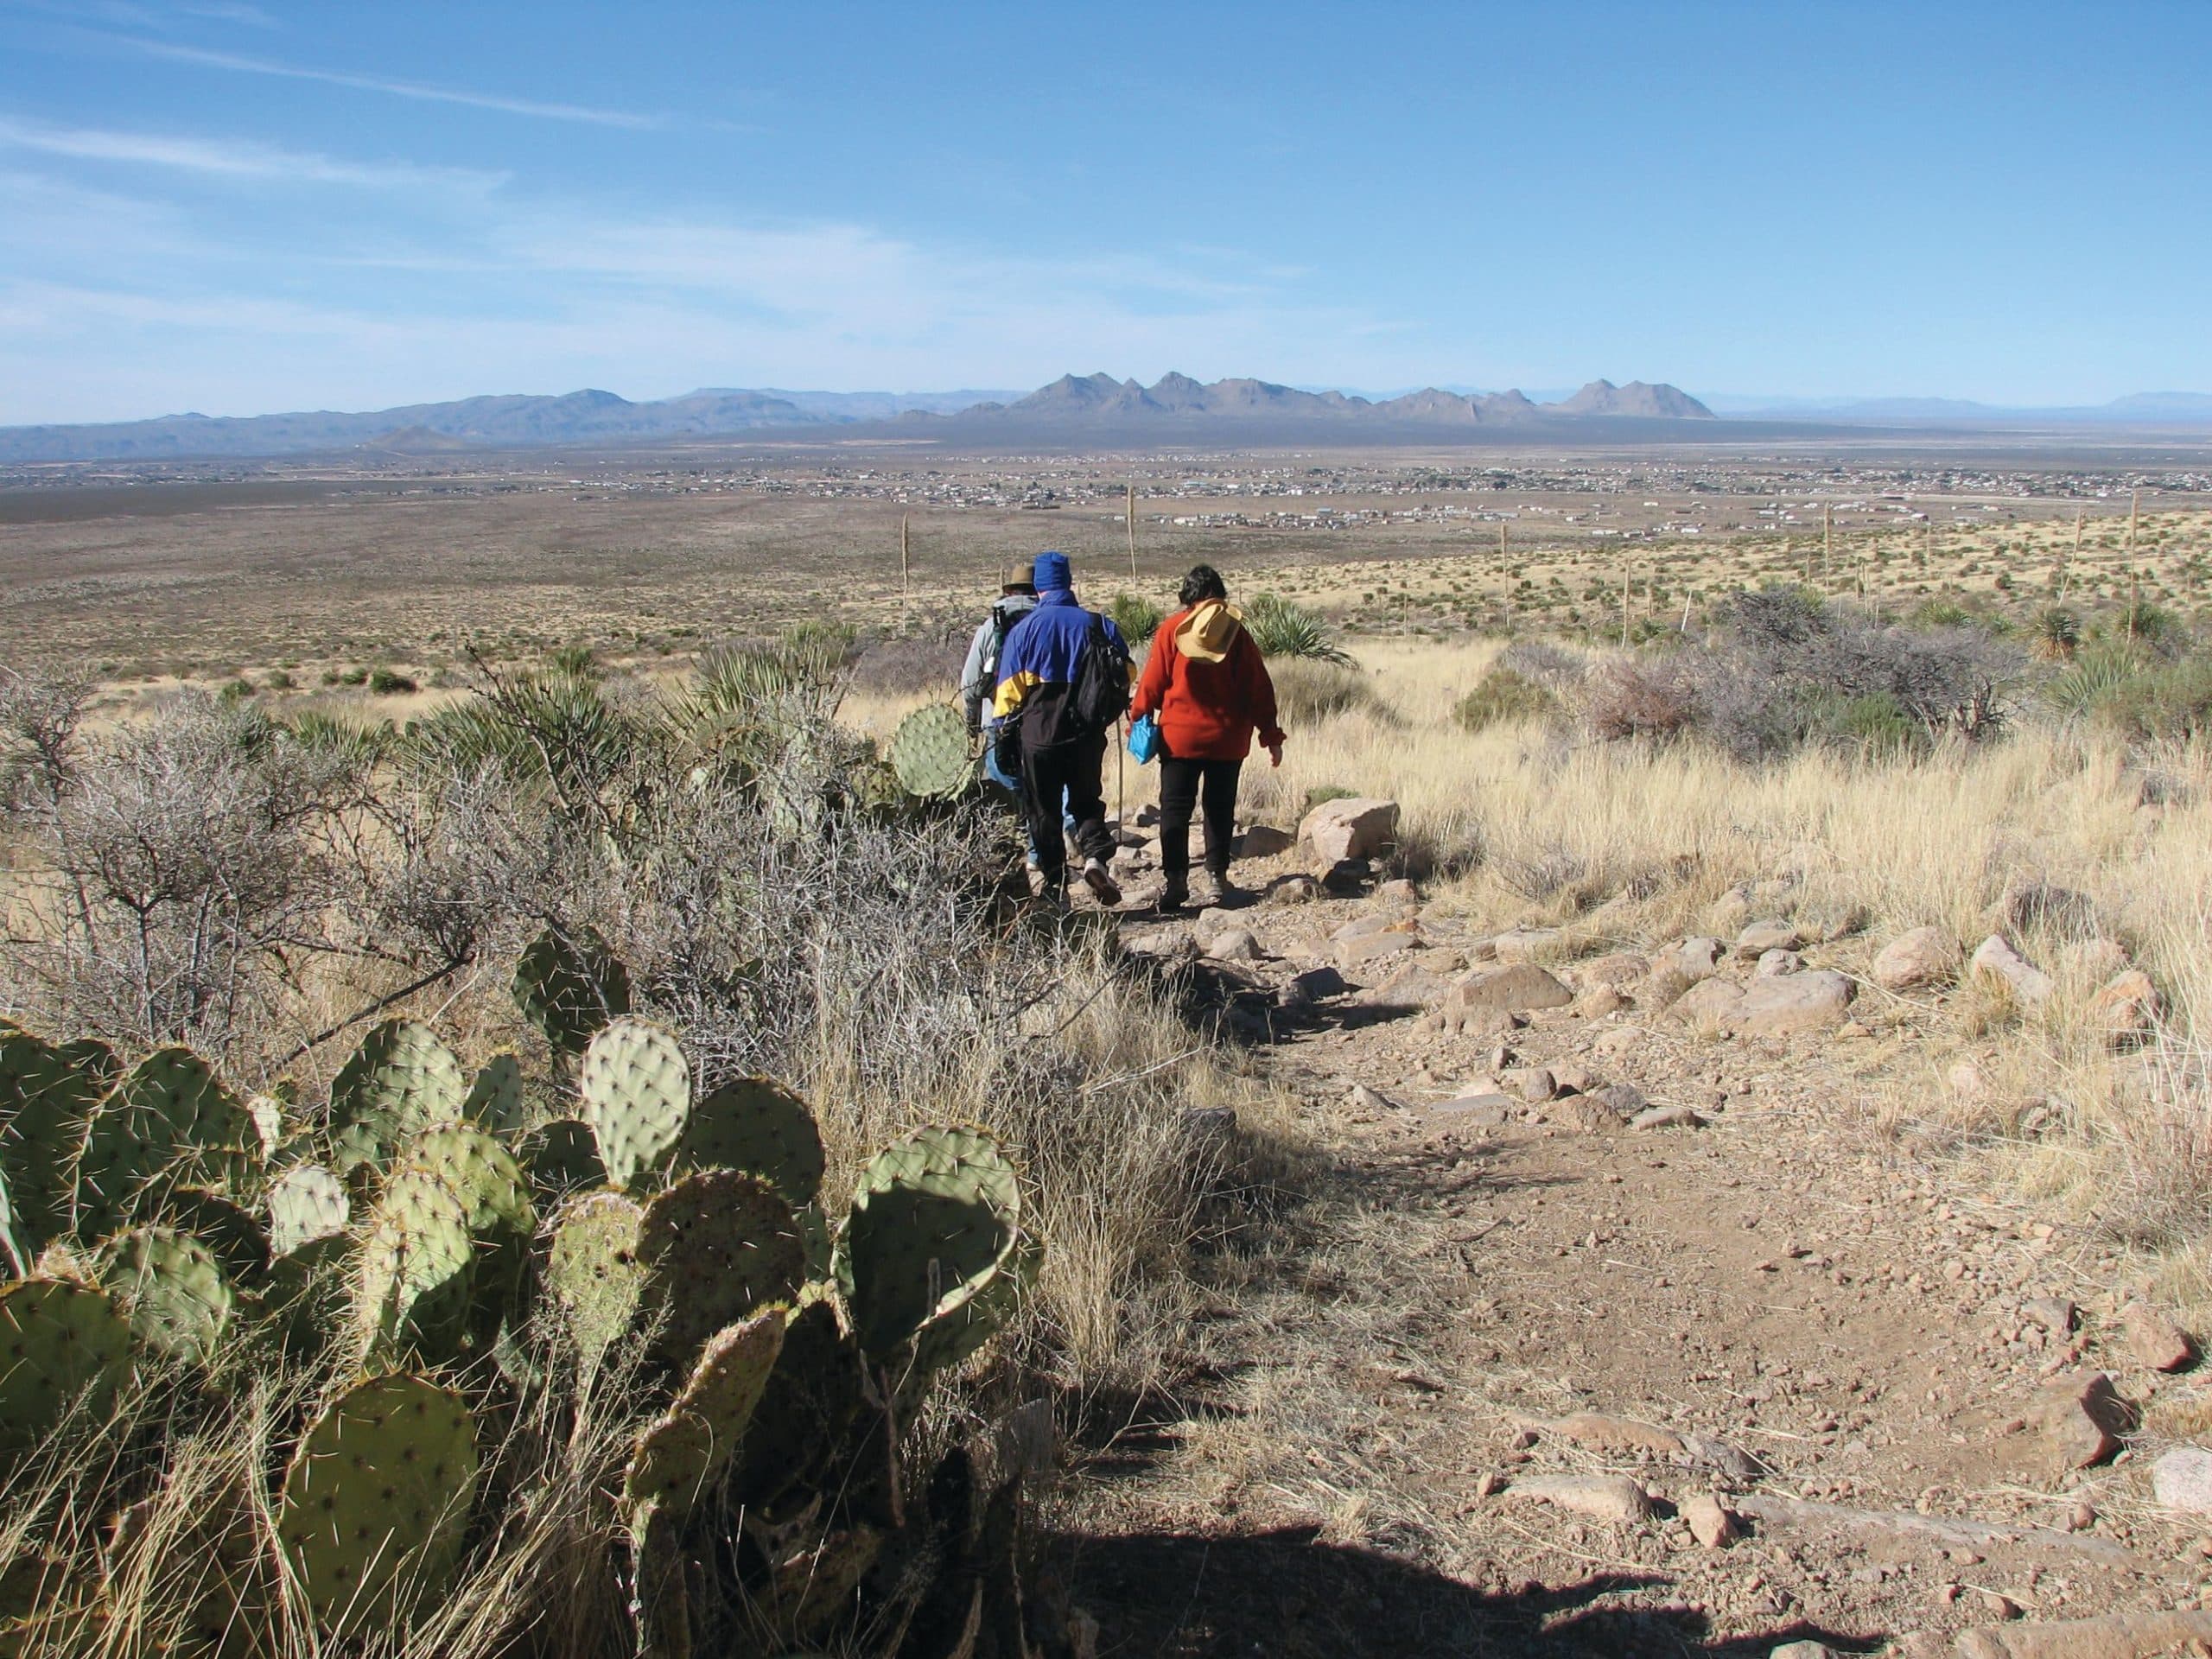 Hikers walking the Baylor Canyon Trail with the mountains in the distance and cacti along the trail.